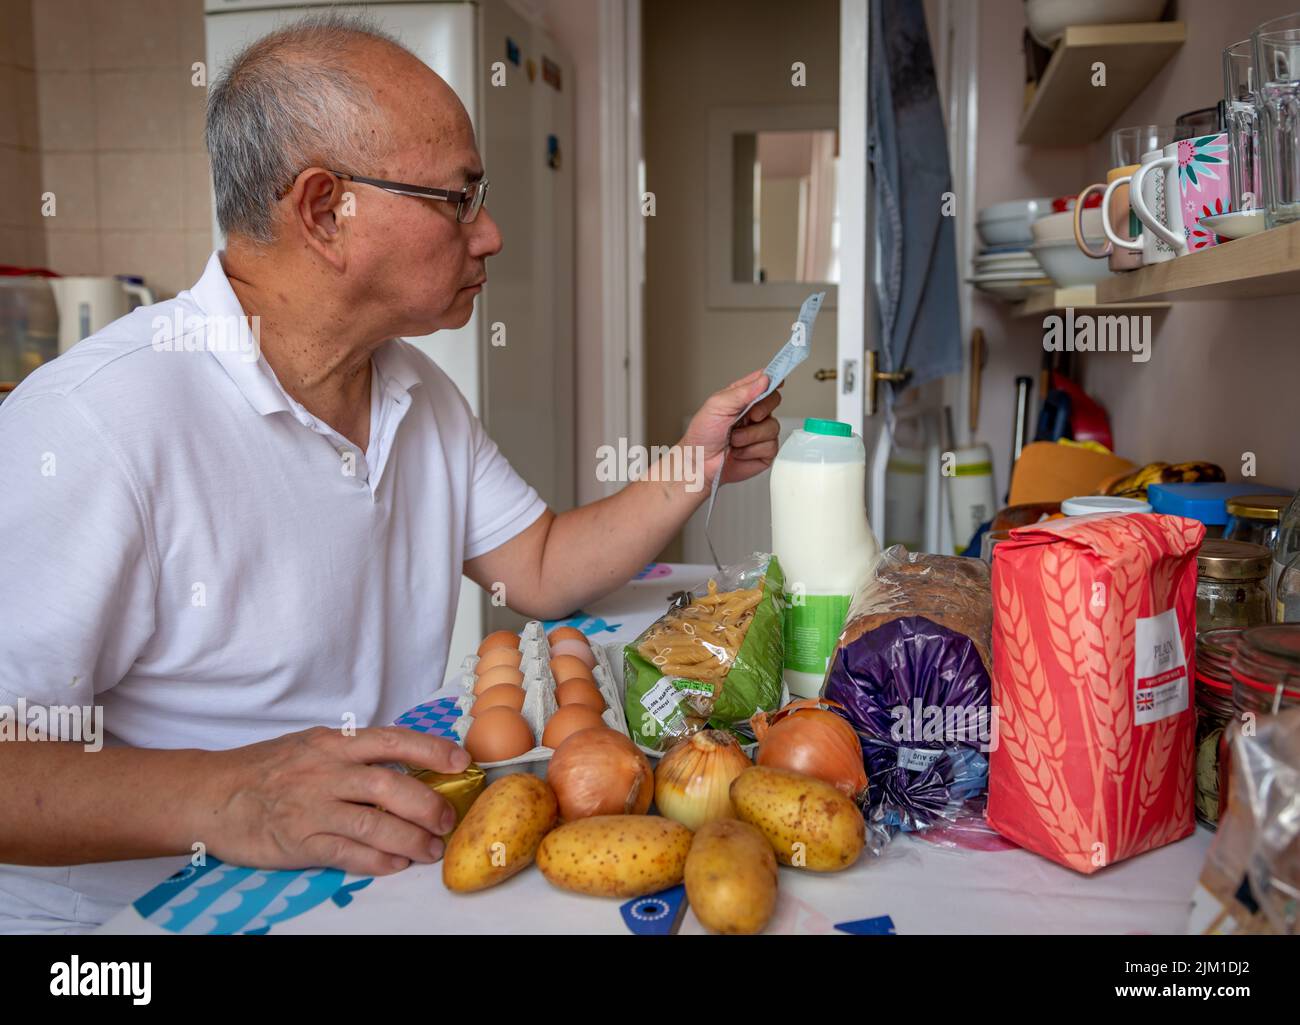 A senior man in the kitchen checking the cost of daily essential food as rising inflation and cost of living affect living standards. Stock Photo